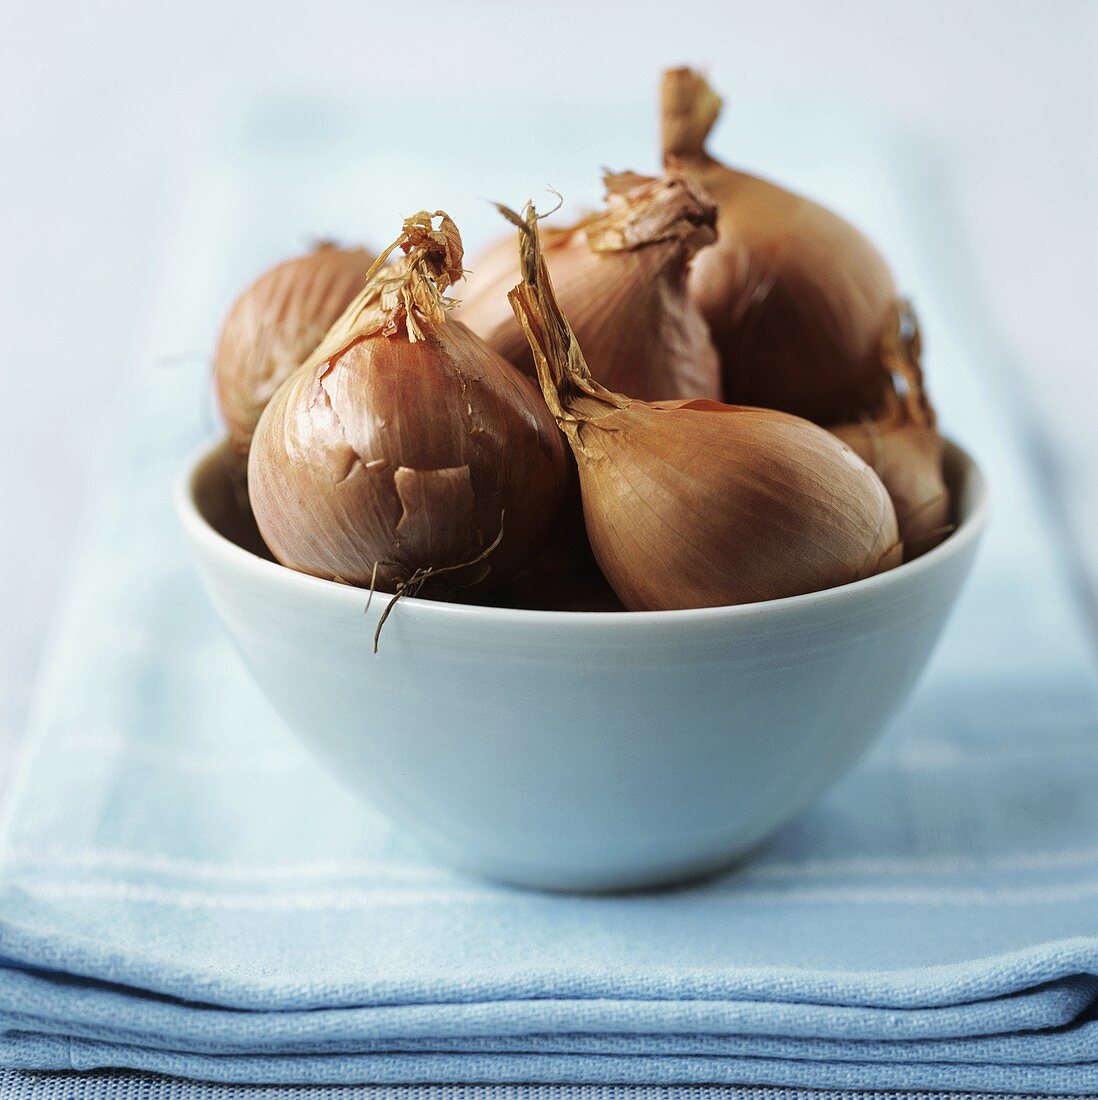 Onions in a ceramic bowl on a tea towel